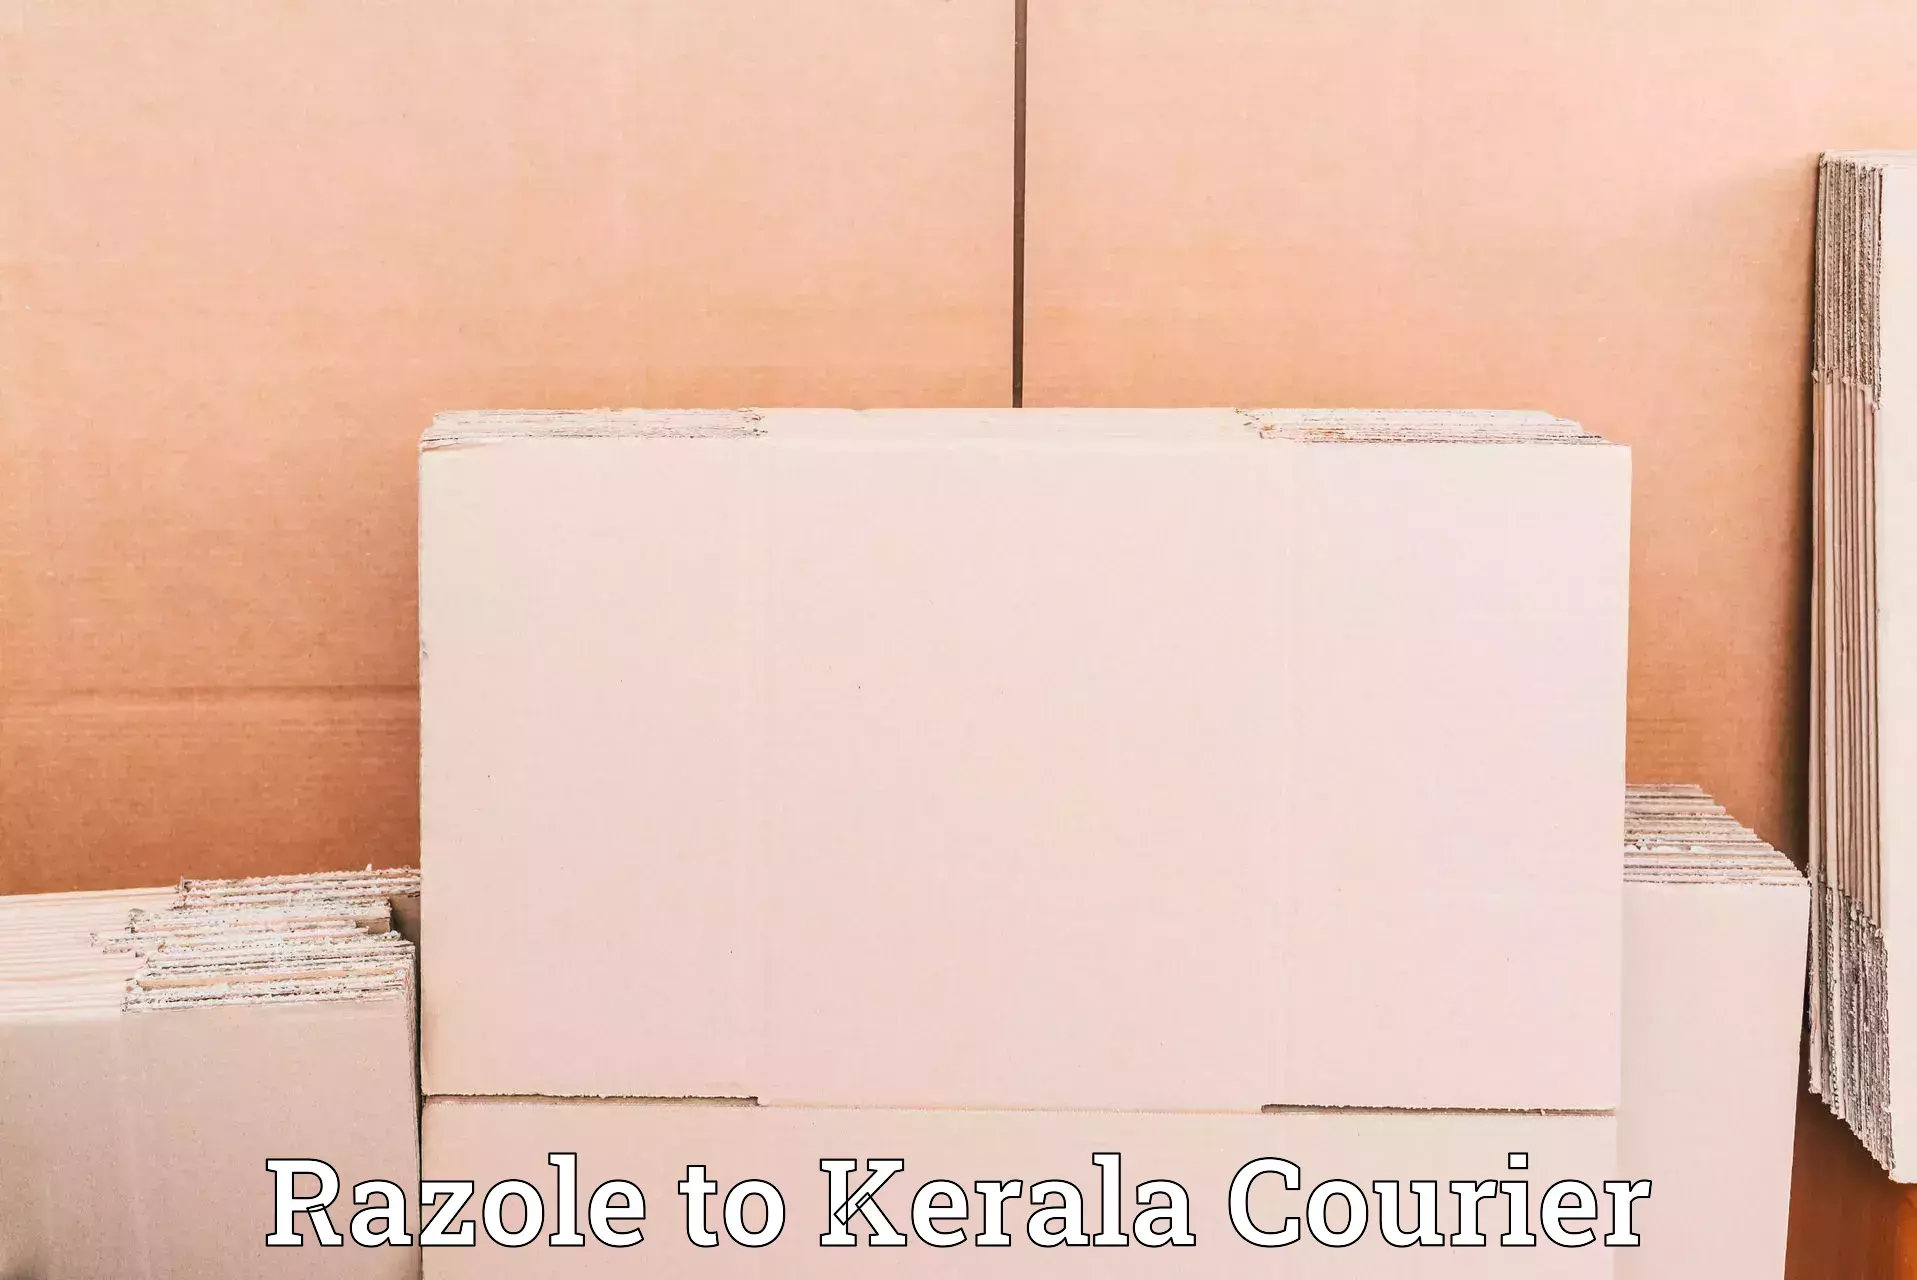 Large-scale shipping solutions Razole to Kerala